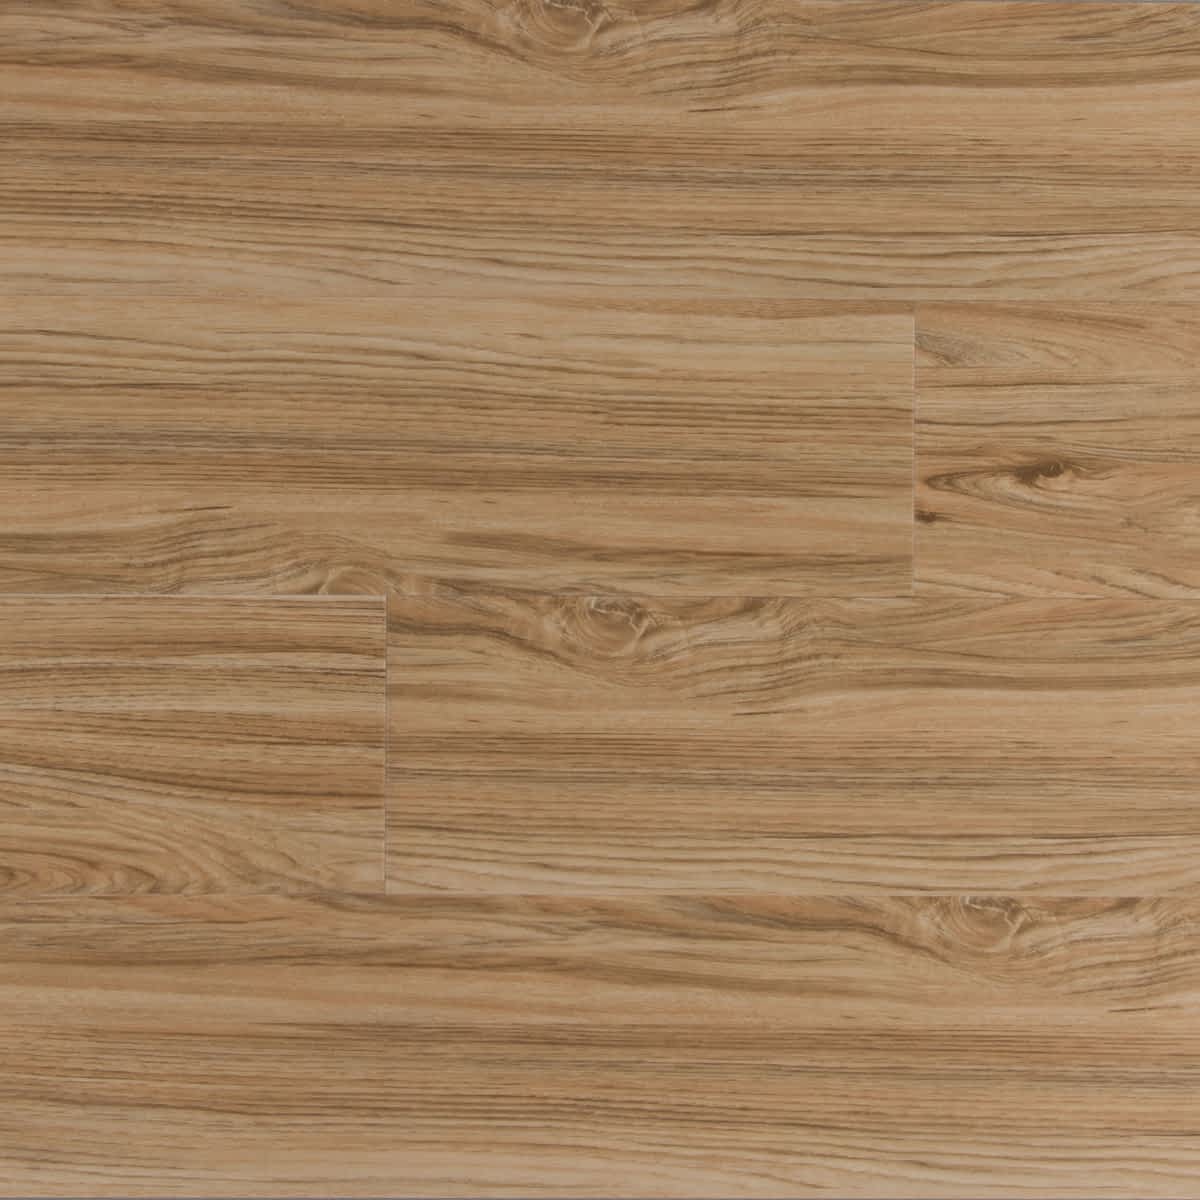 Flooring Spc Xpe Rubber Backing, Vinyl Flooring With Backing